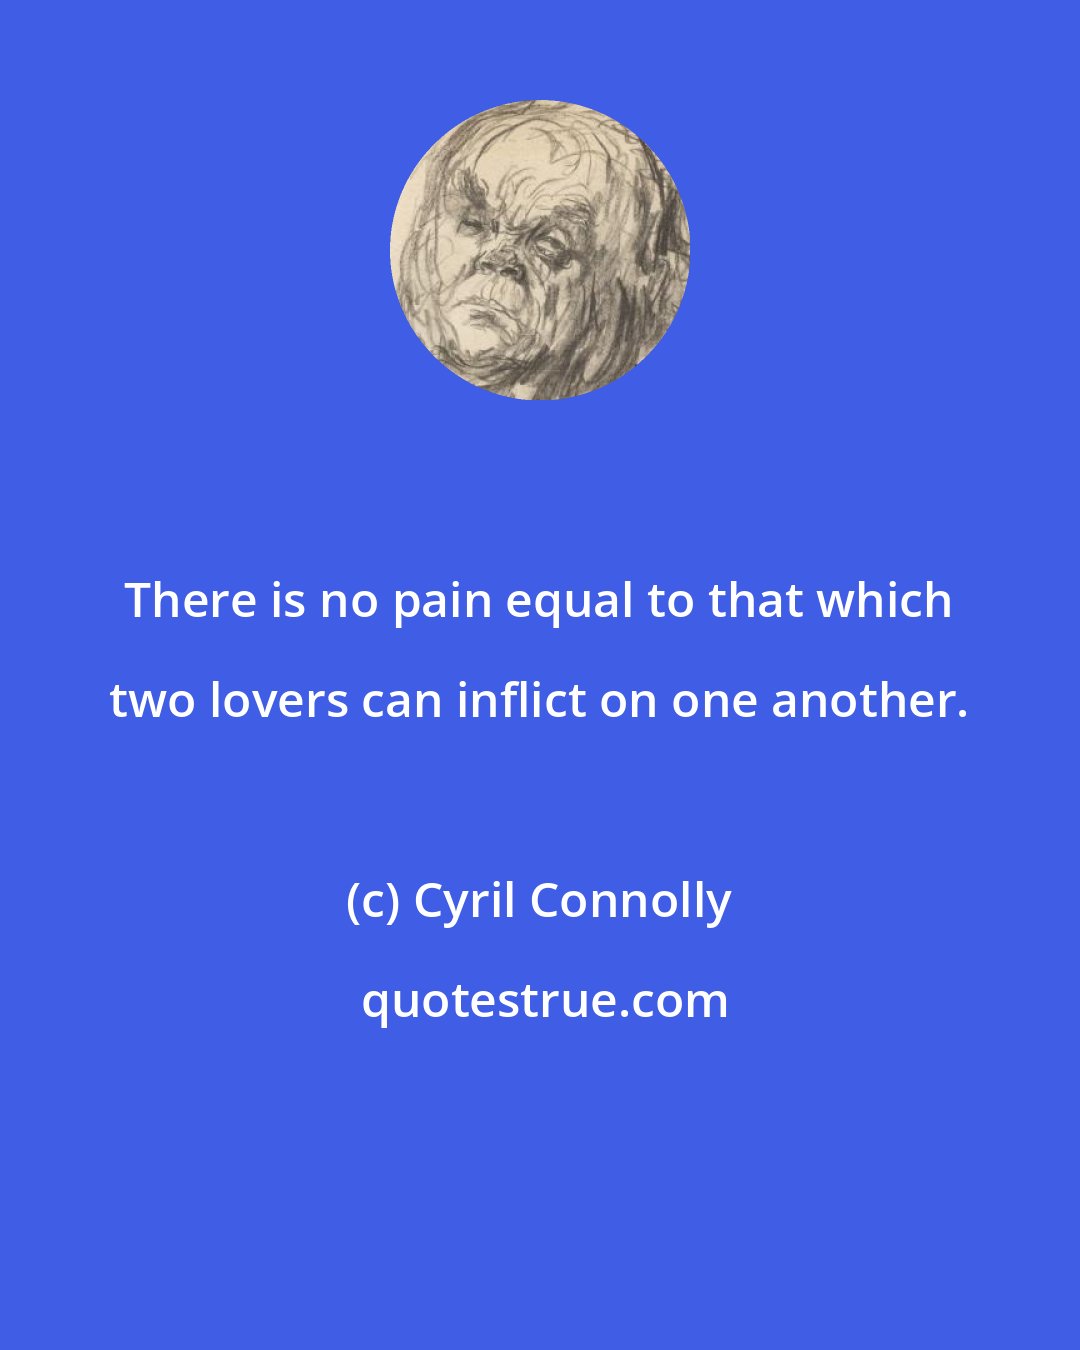 Cyril Connolly: There is no pain equal to that which two lovers can inflict on one another.